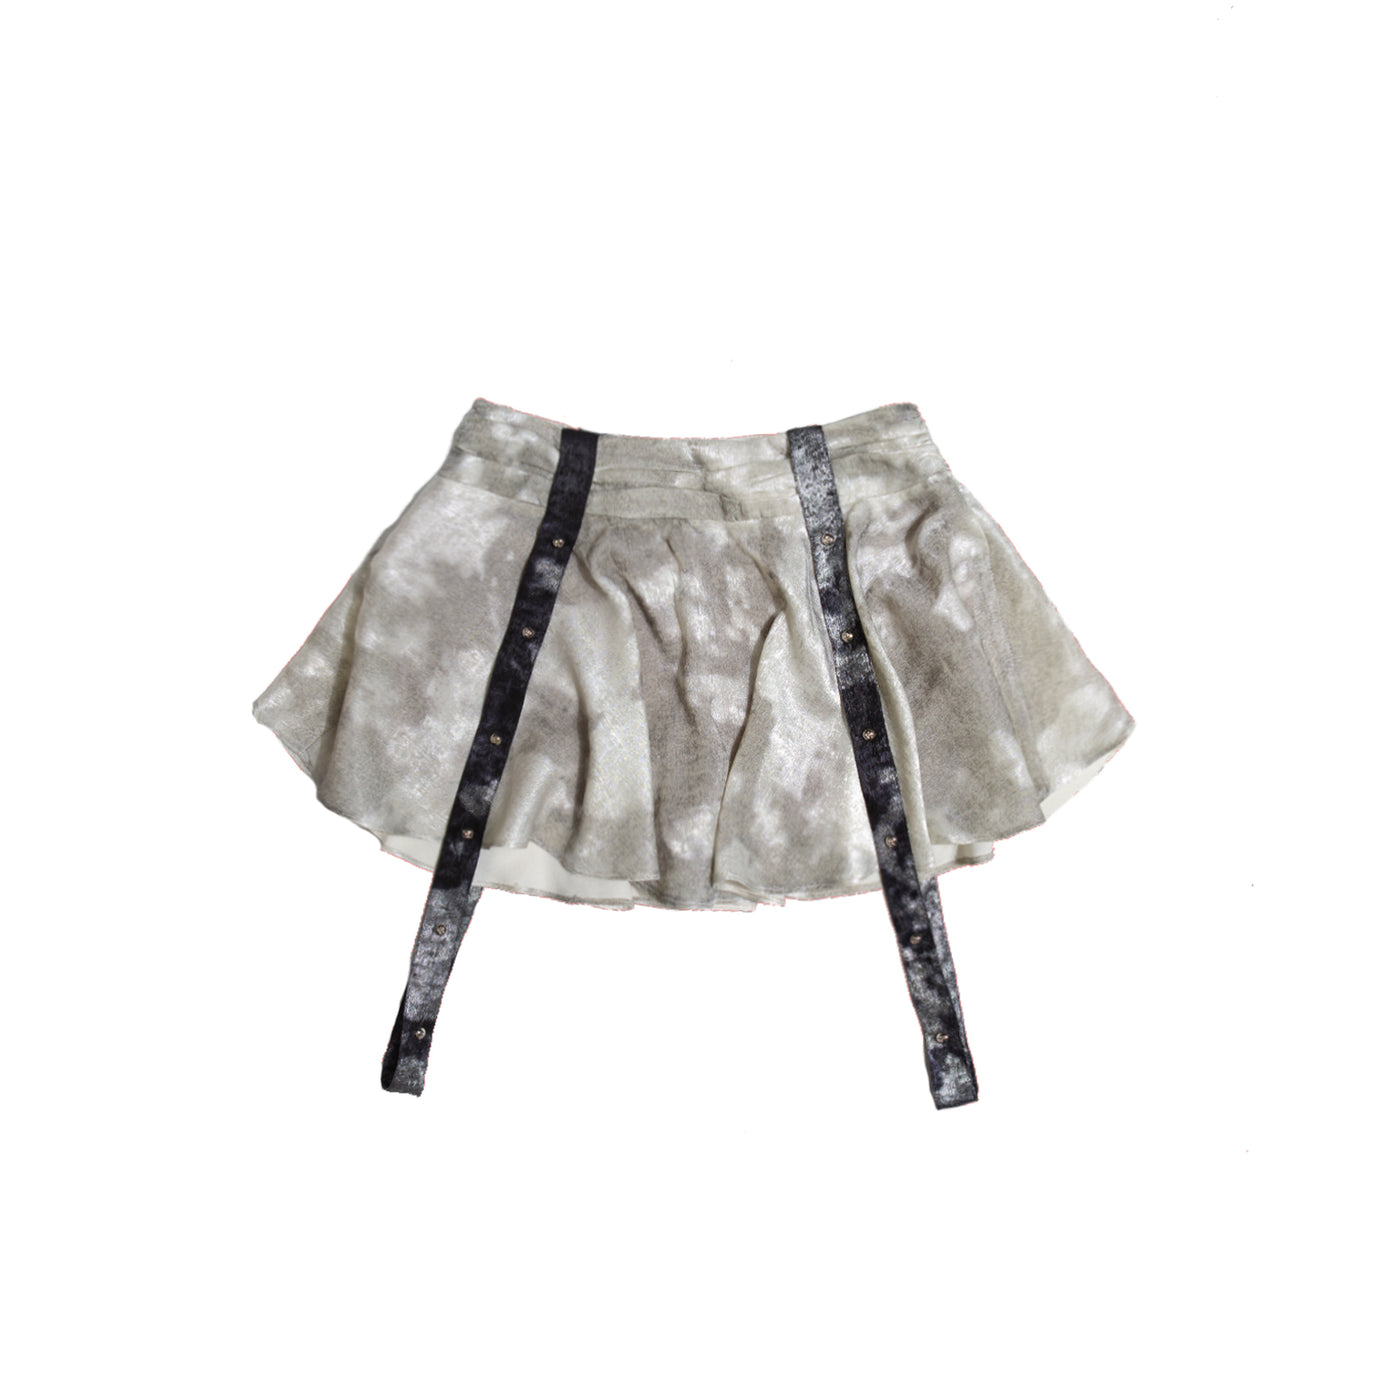 【ARIADNAw】Double suspender type design frill cut skirt  AD0003